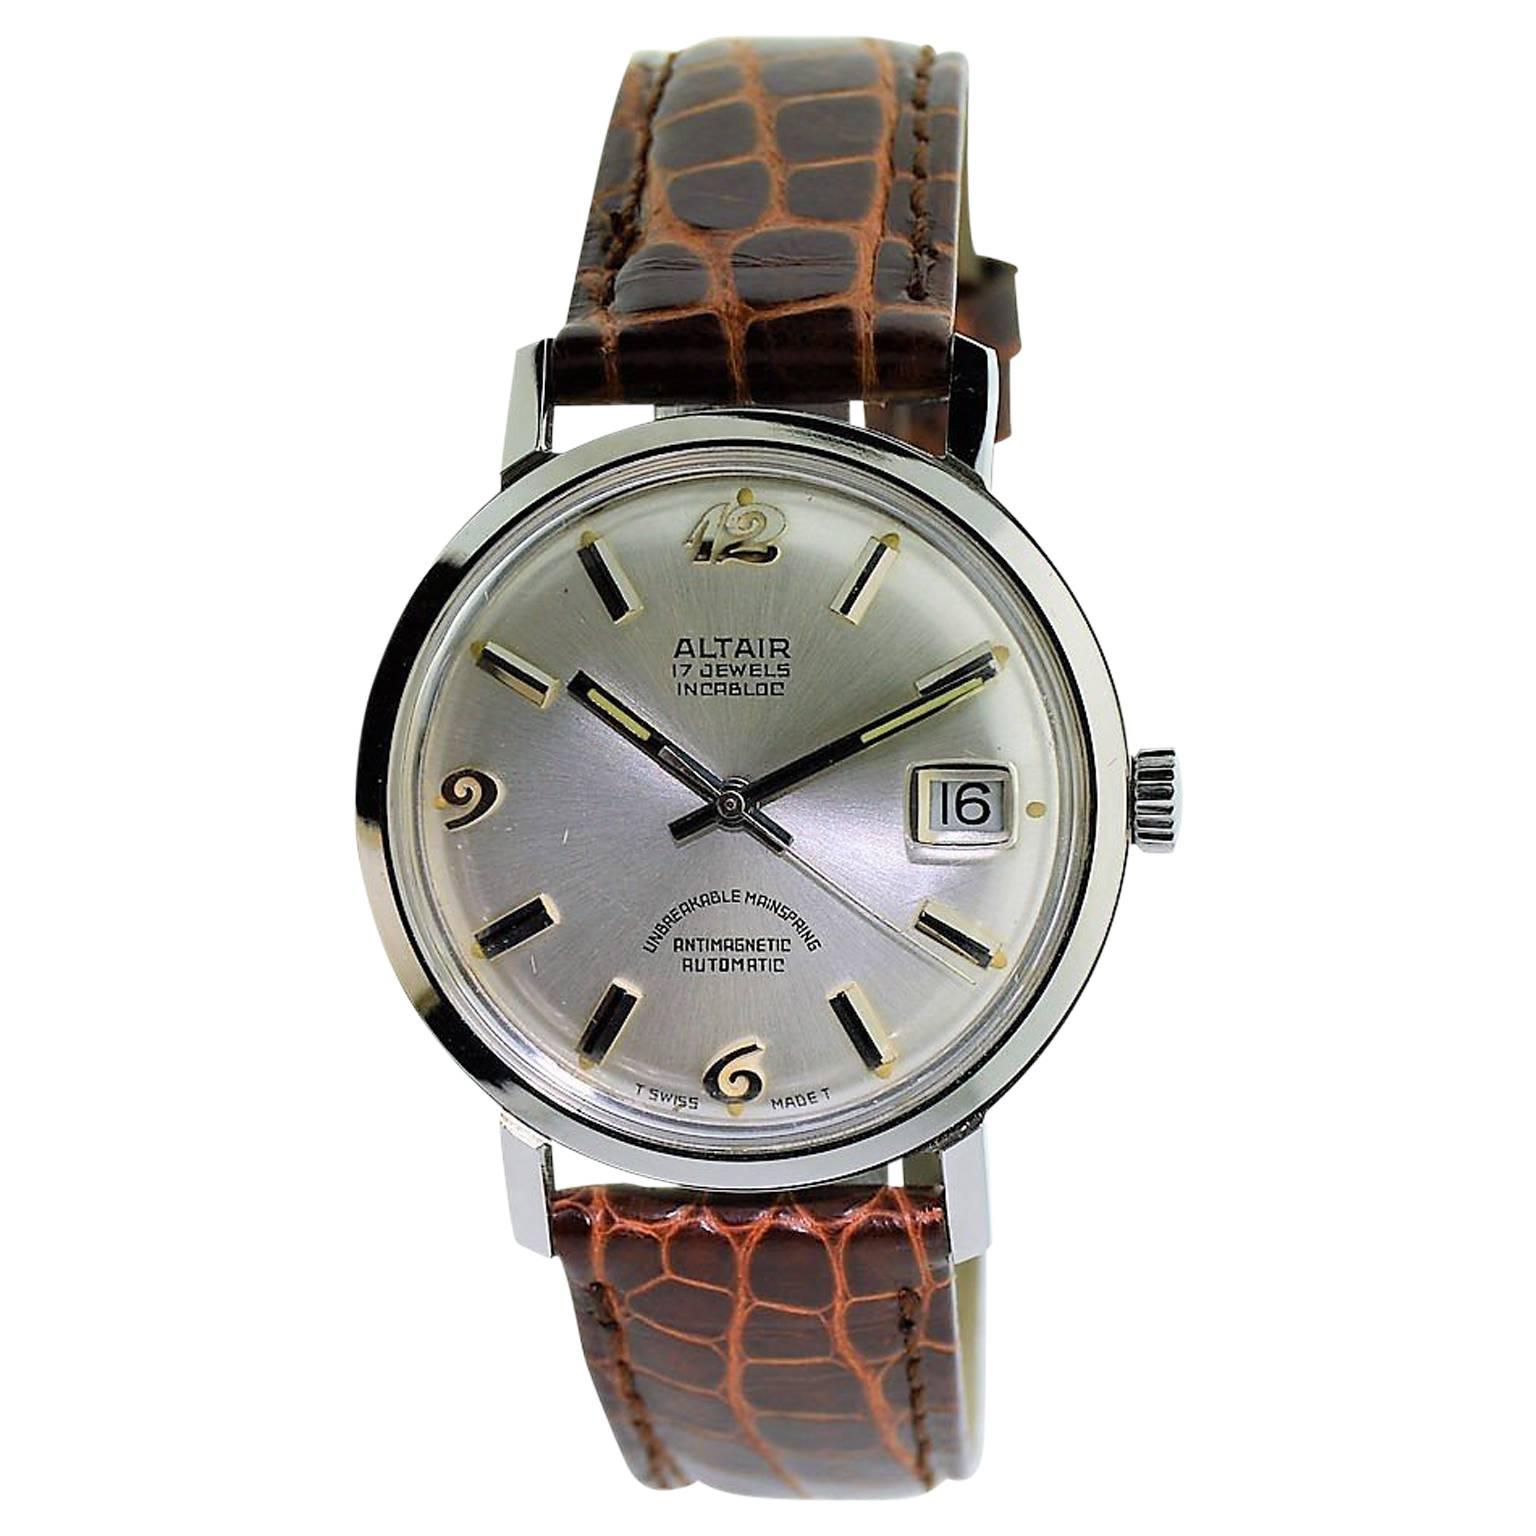 Altair Stainless Steel Calendar Automatic Watch New Old Stock